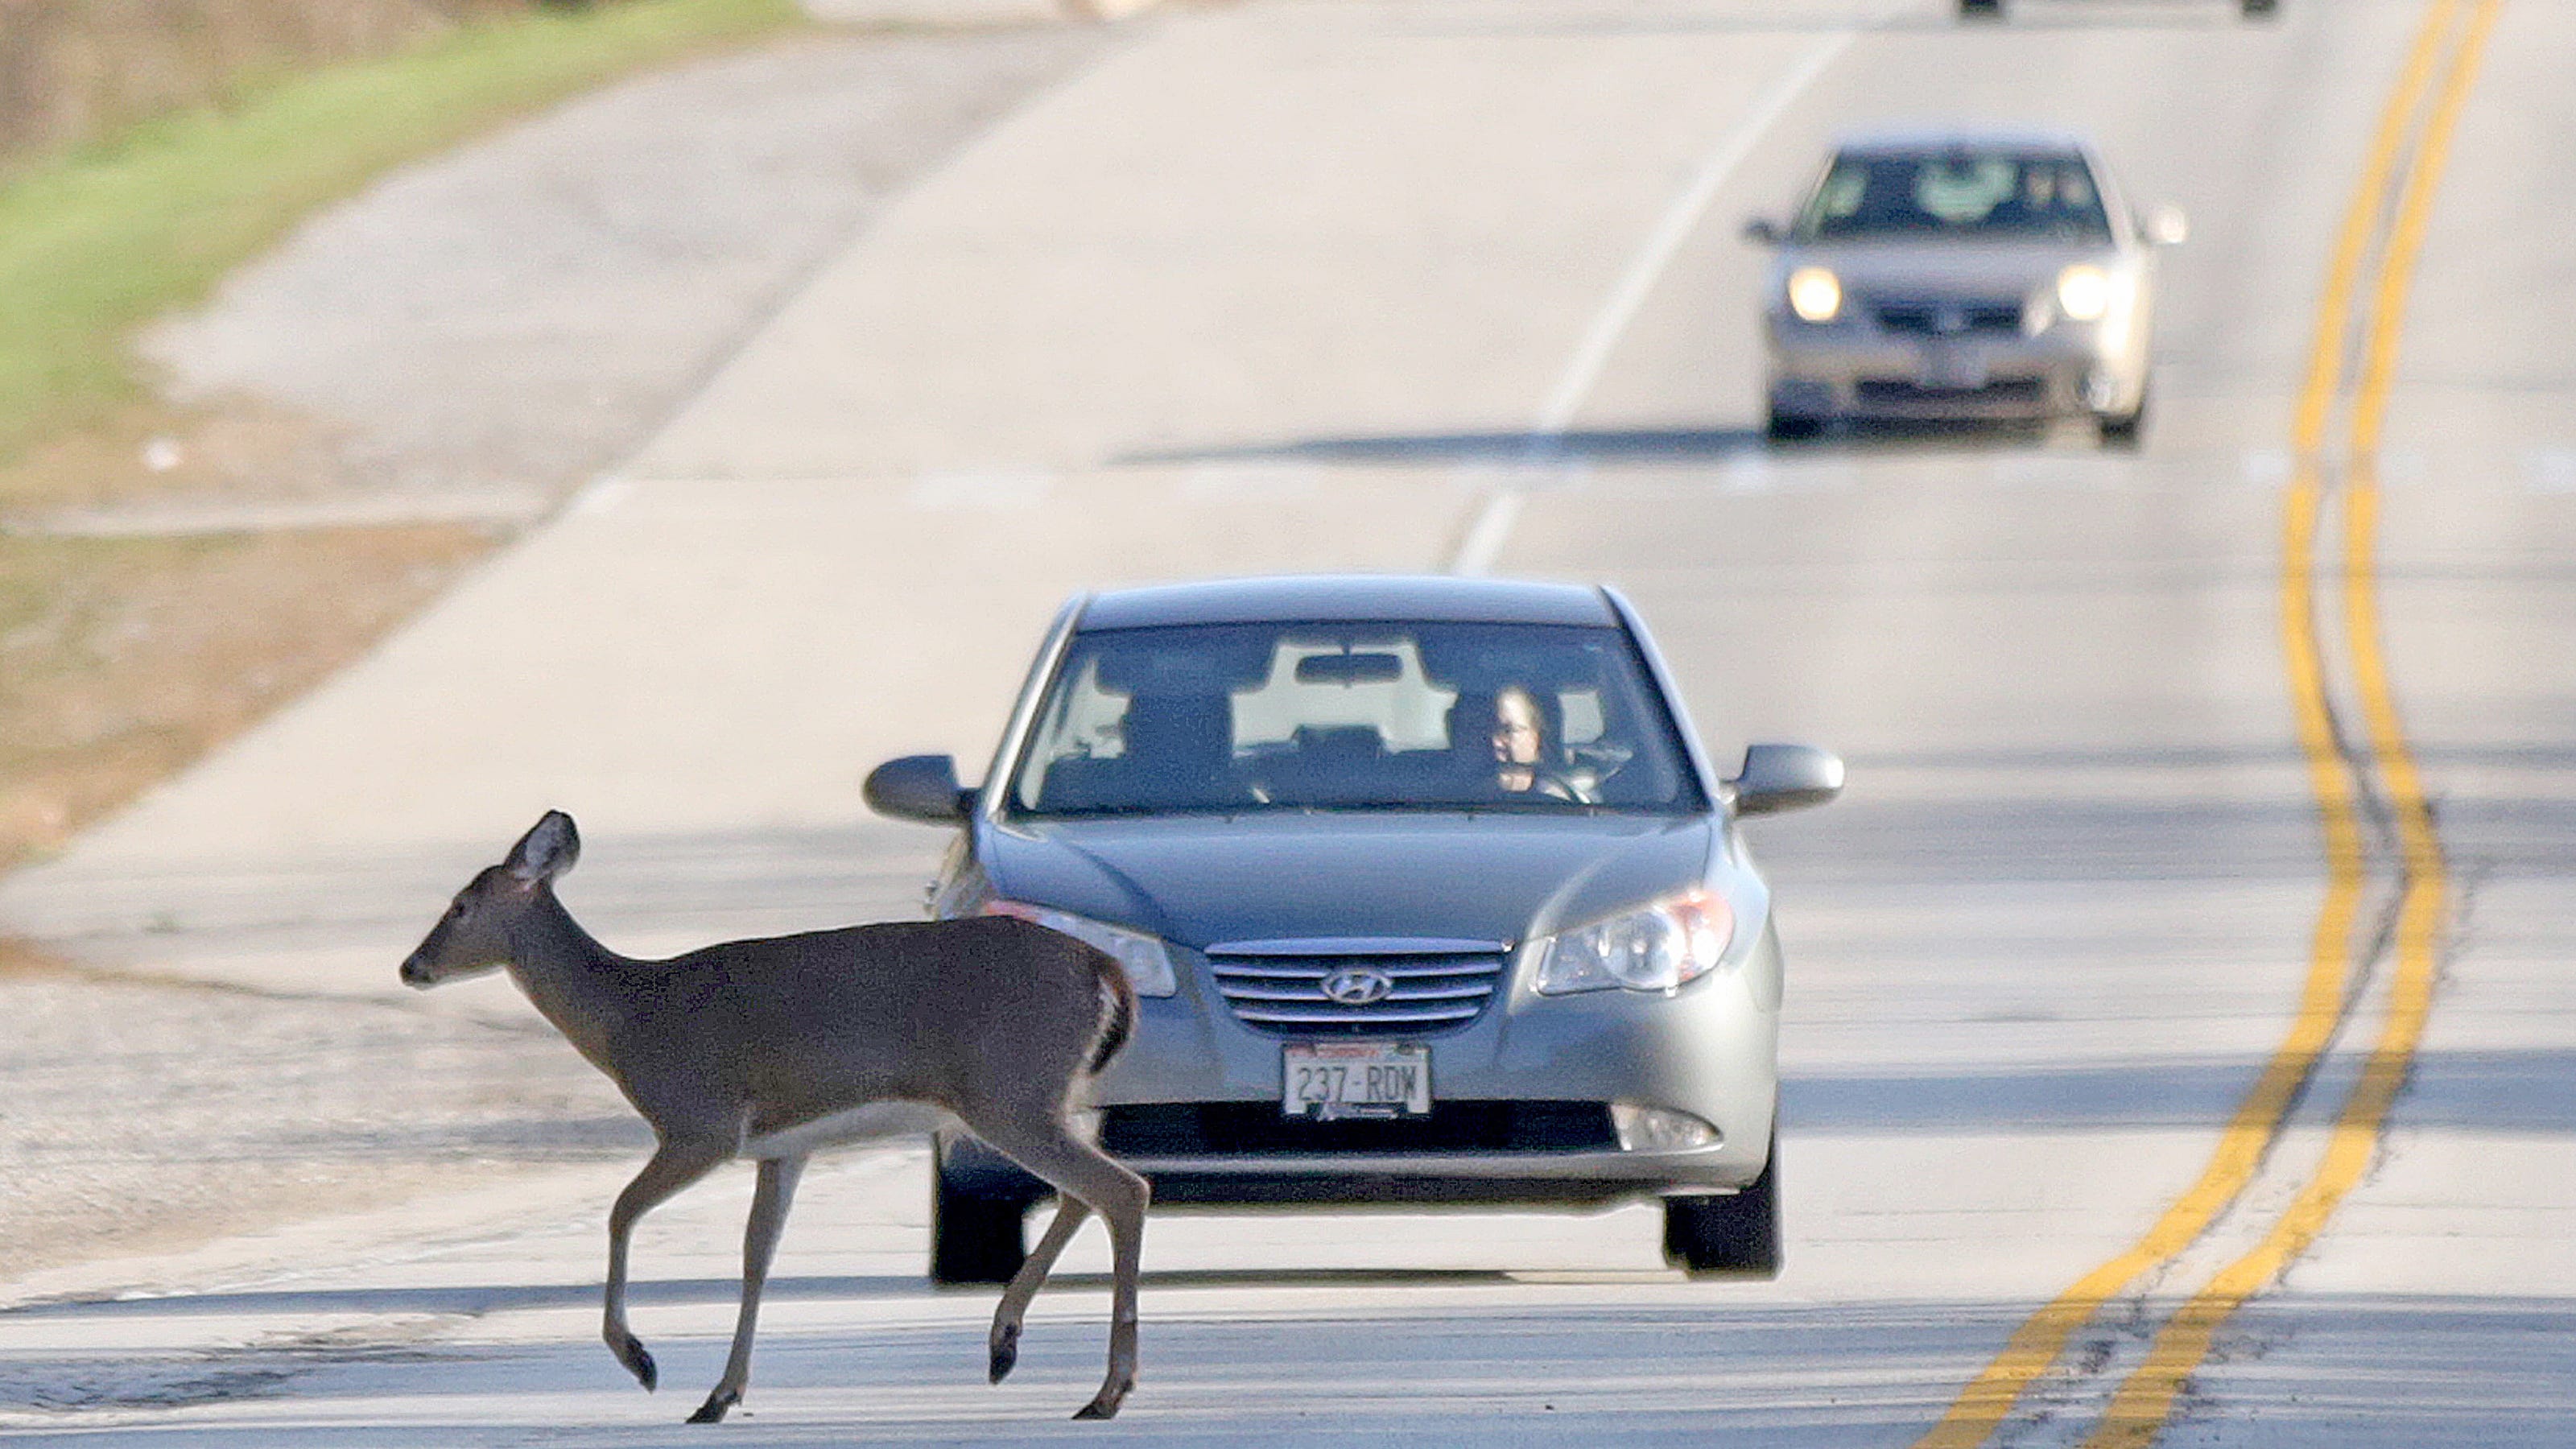 Hit a deer with your car? In Wisconsin, it happens every day